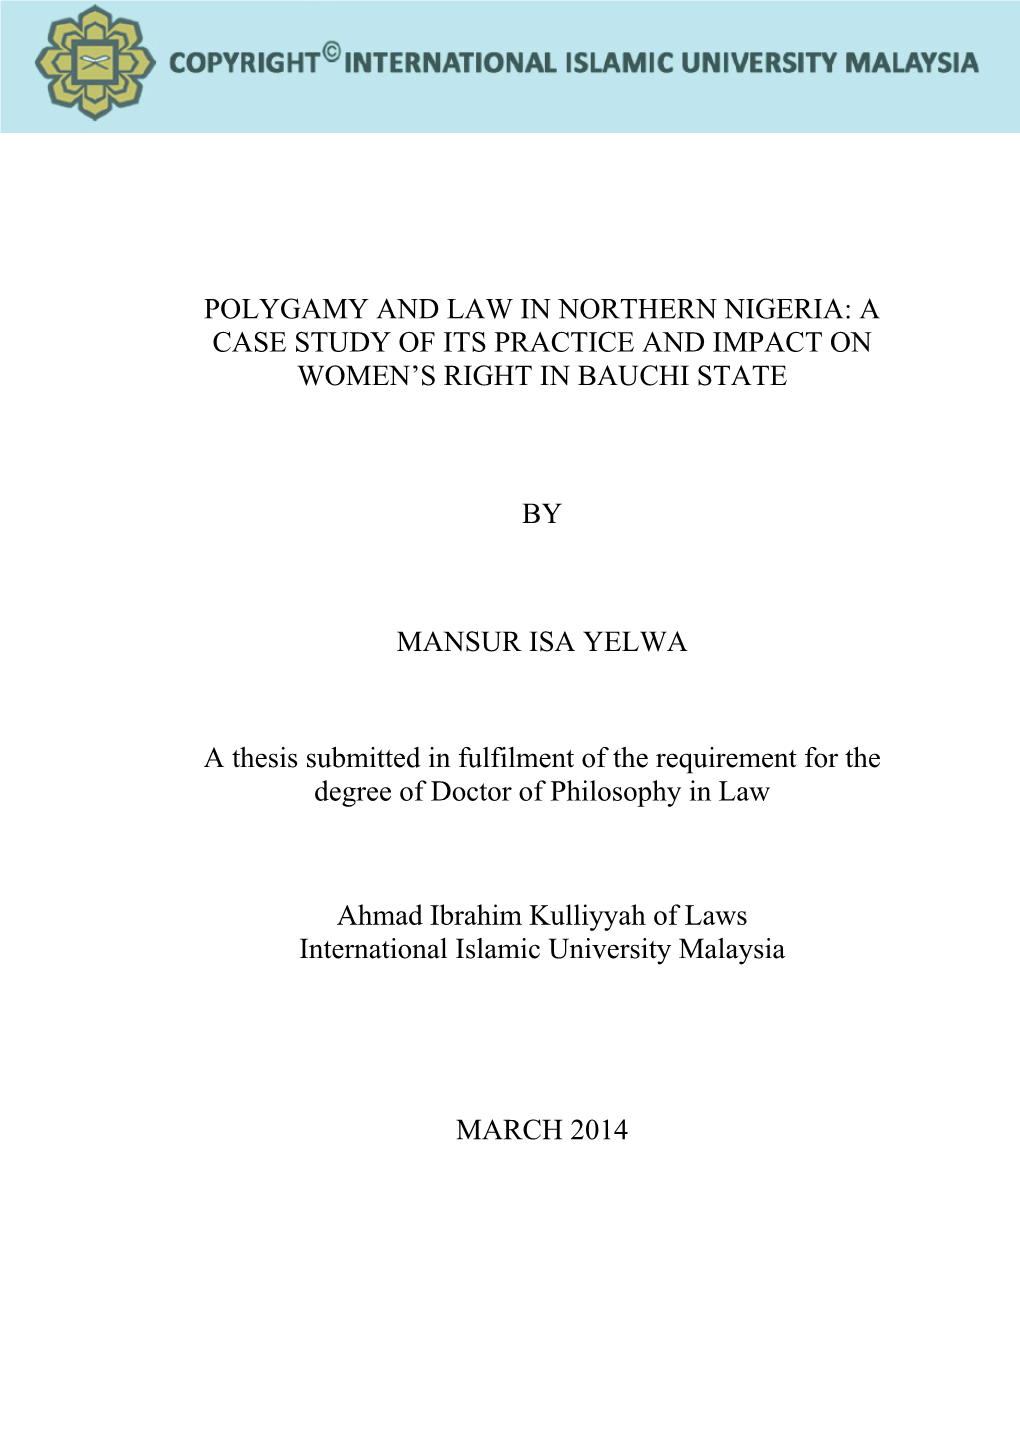 Polygamy and Law in Northern Nigeria: a Case Study of Its Practice and Impact on Women’S Right in Bauchi State